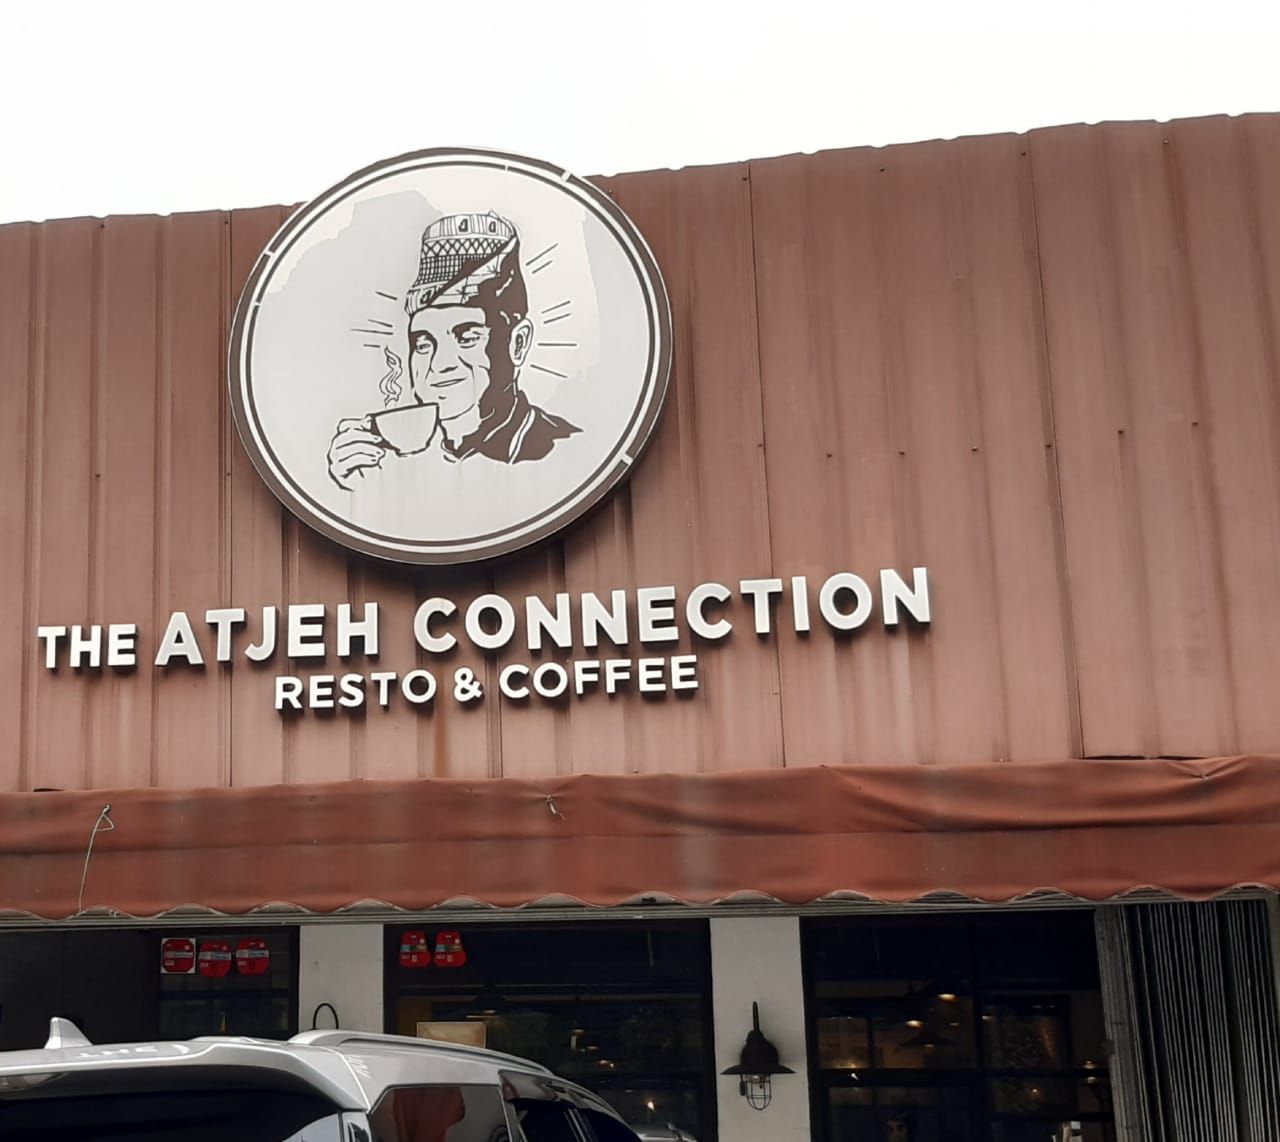 The Atjeh Connection